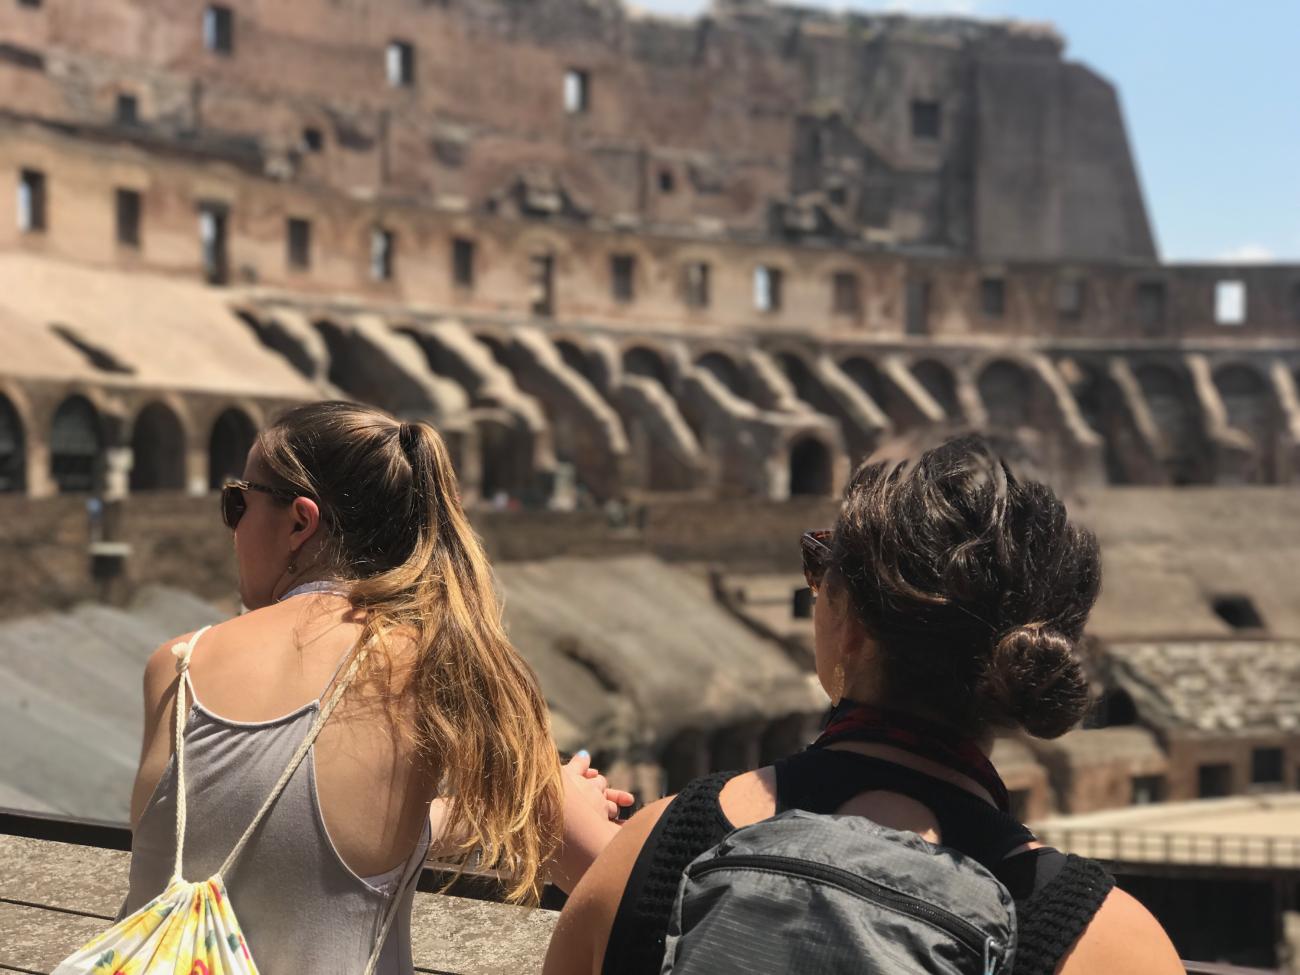 Students looking at a historical site abroad